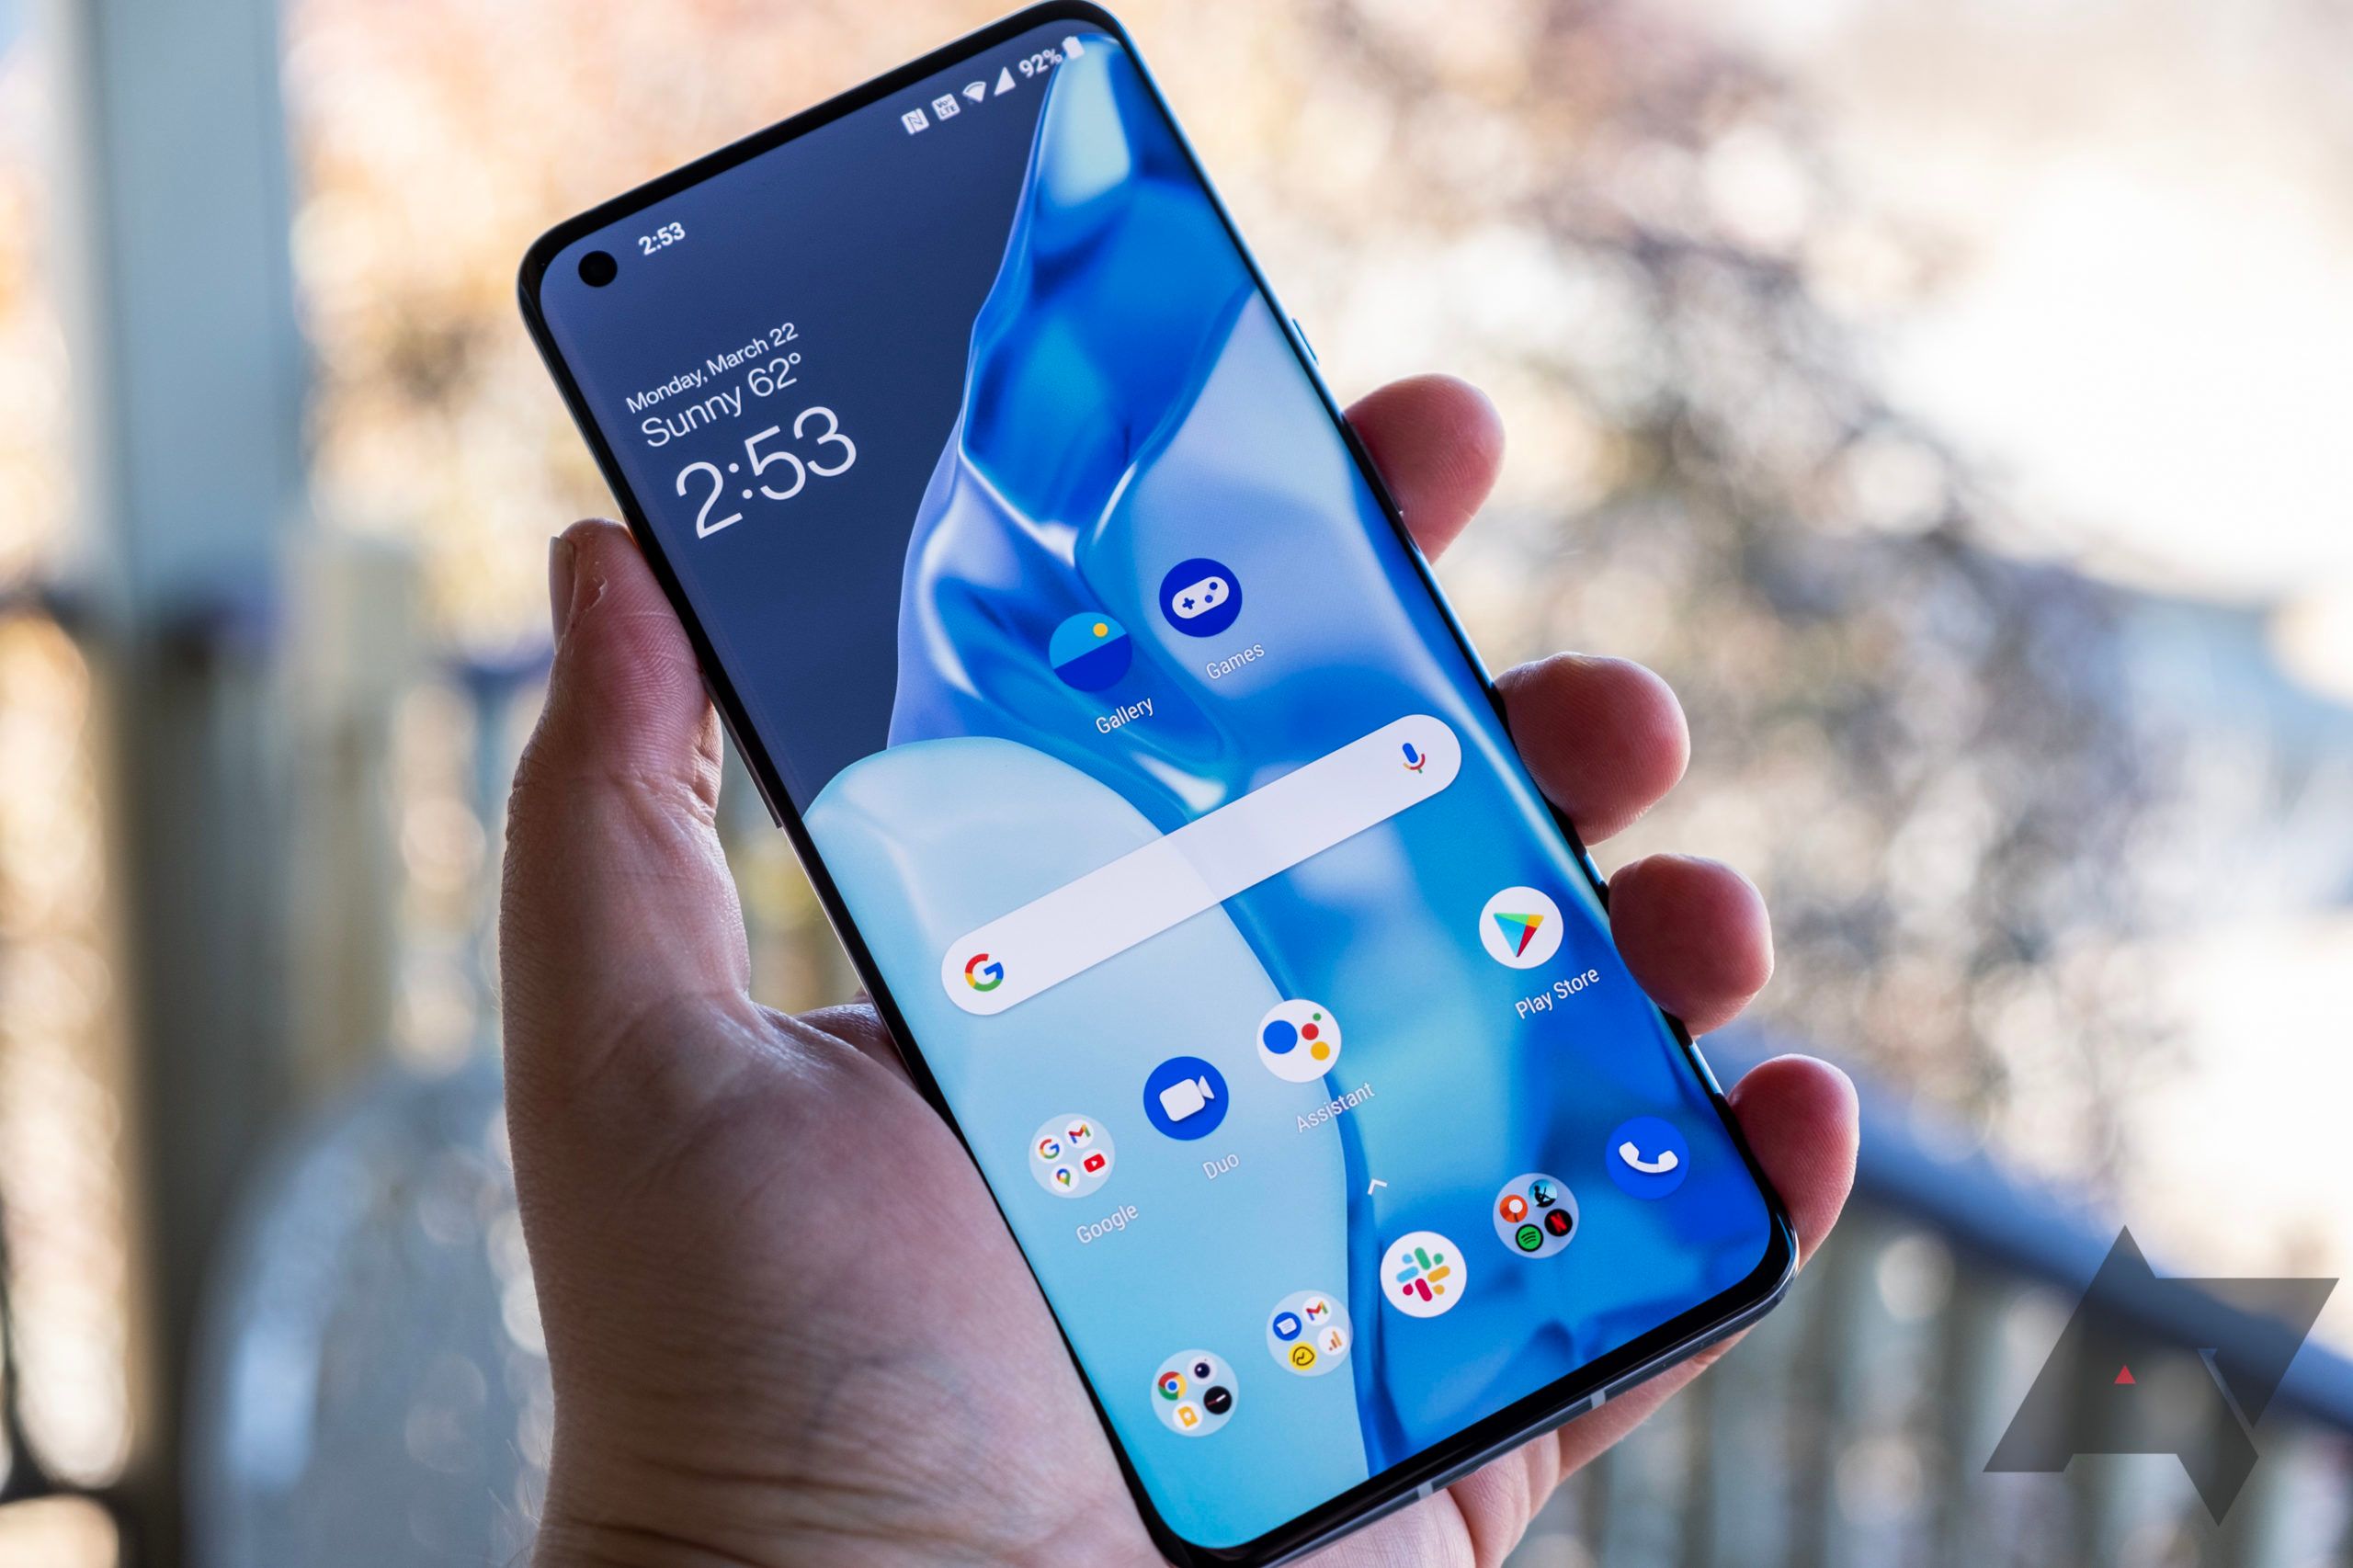 OnePlus 9 Pro review: Flagship Android phone